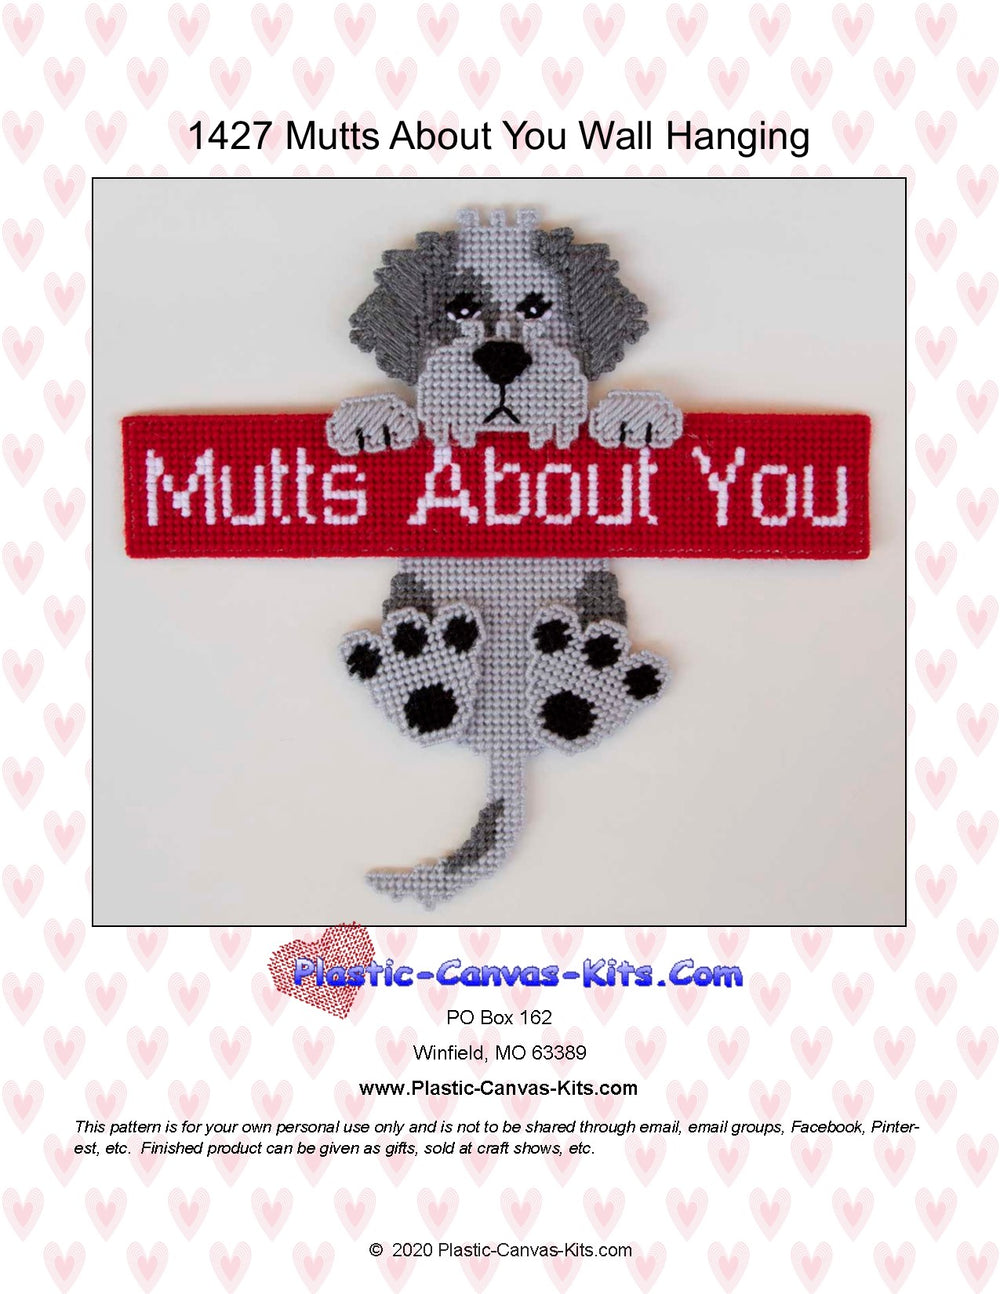 Mutts About You Wall Hanging